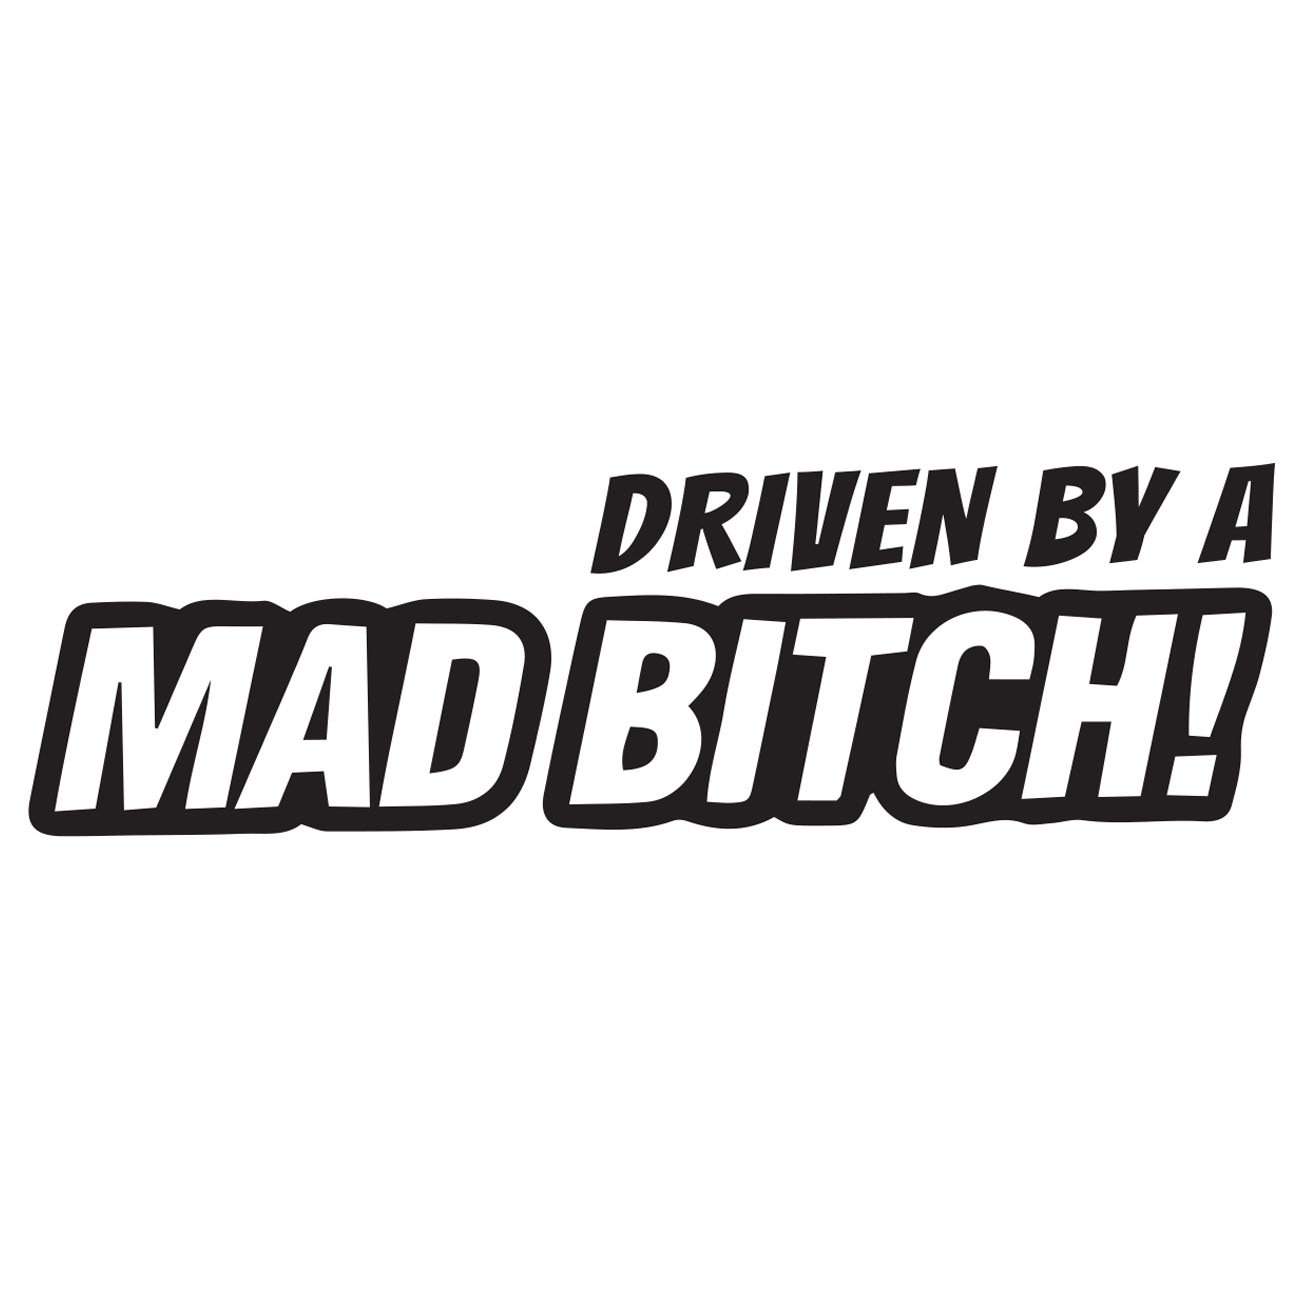 Driven by a mad bitch